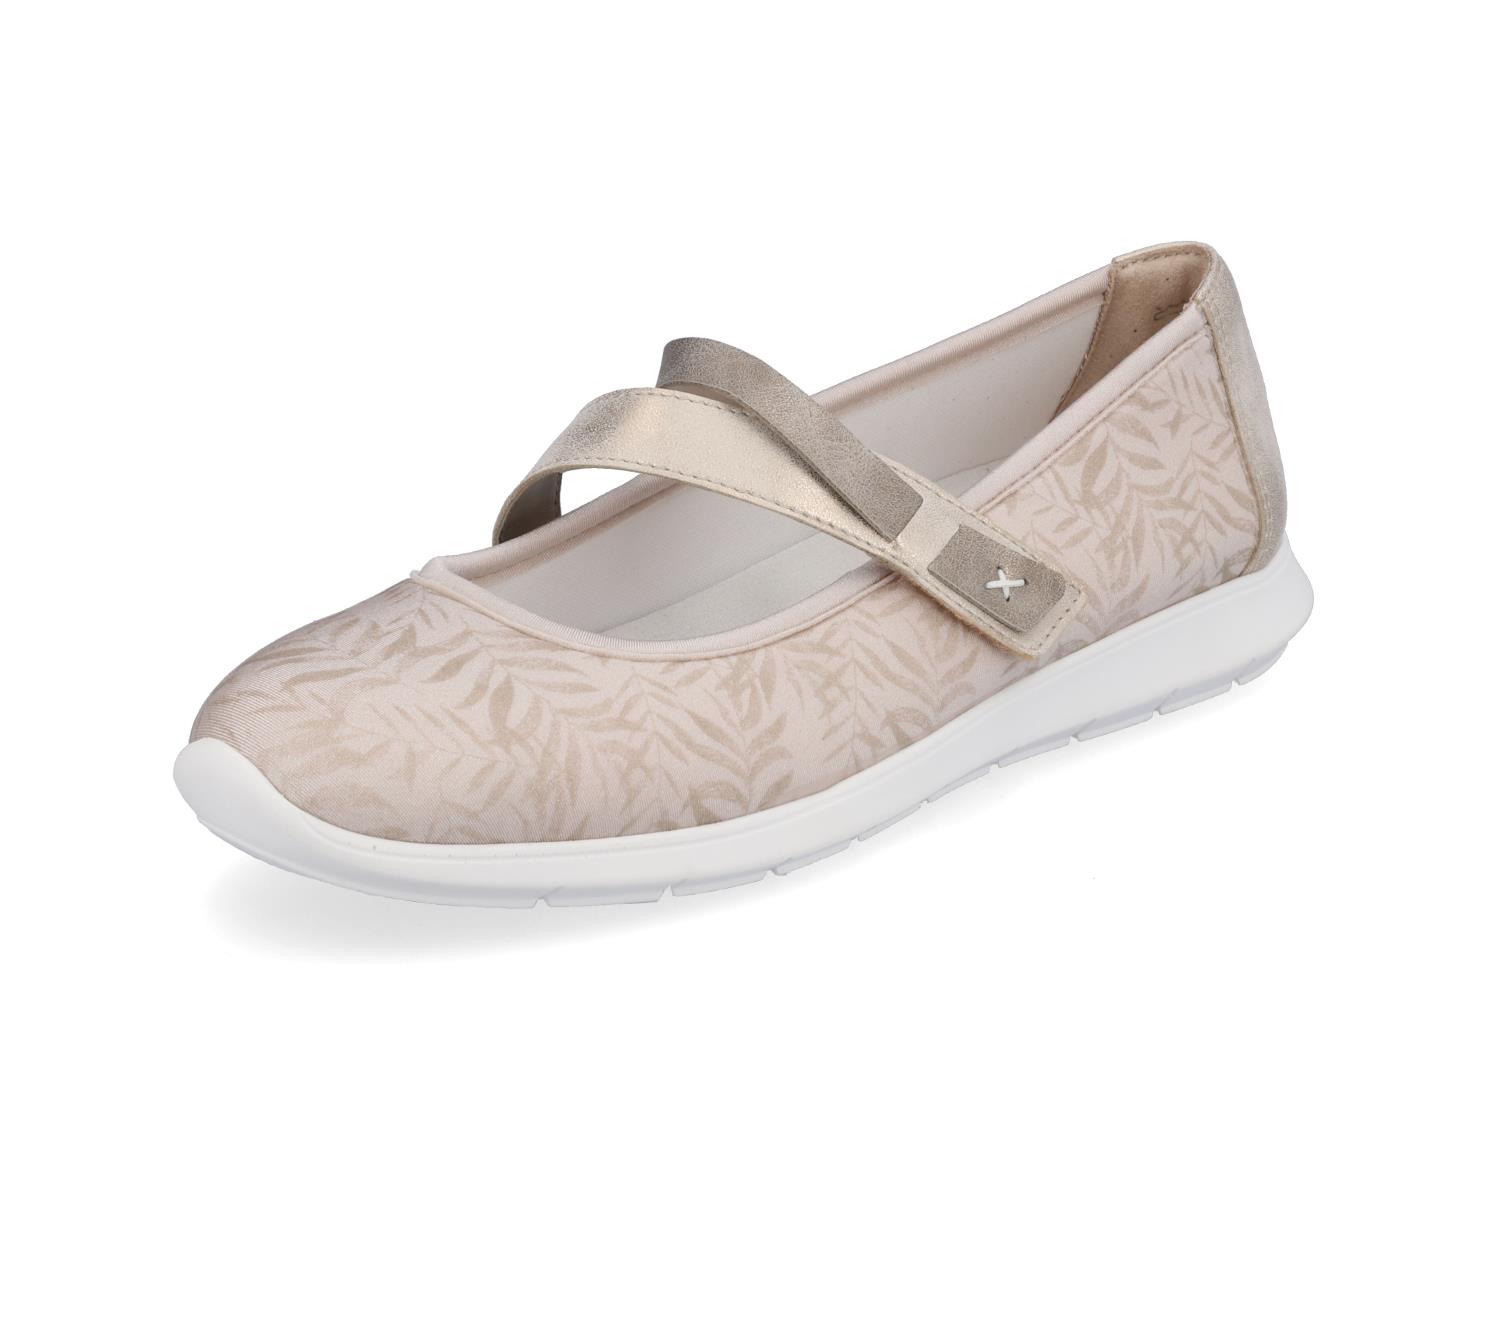 Remonte Mary Janes sandal